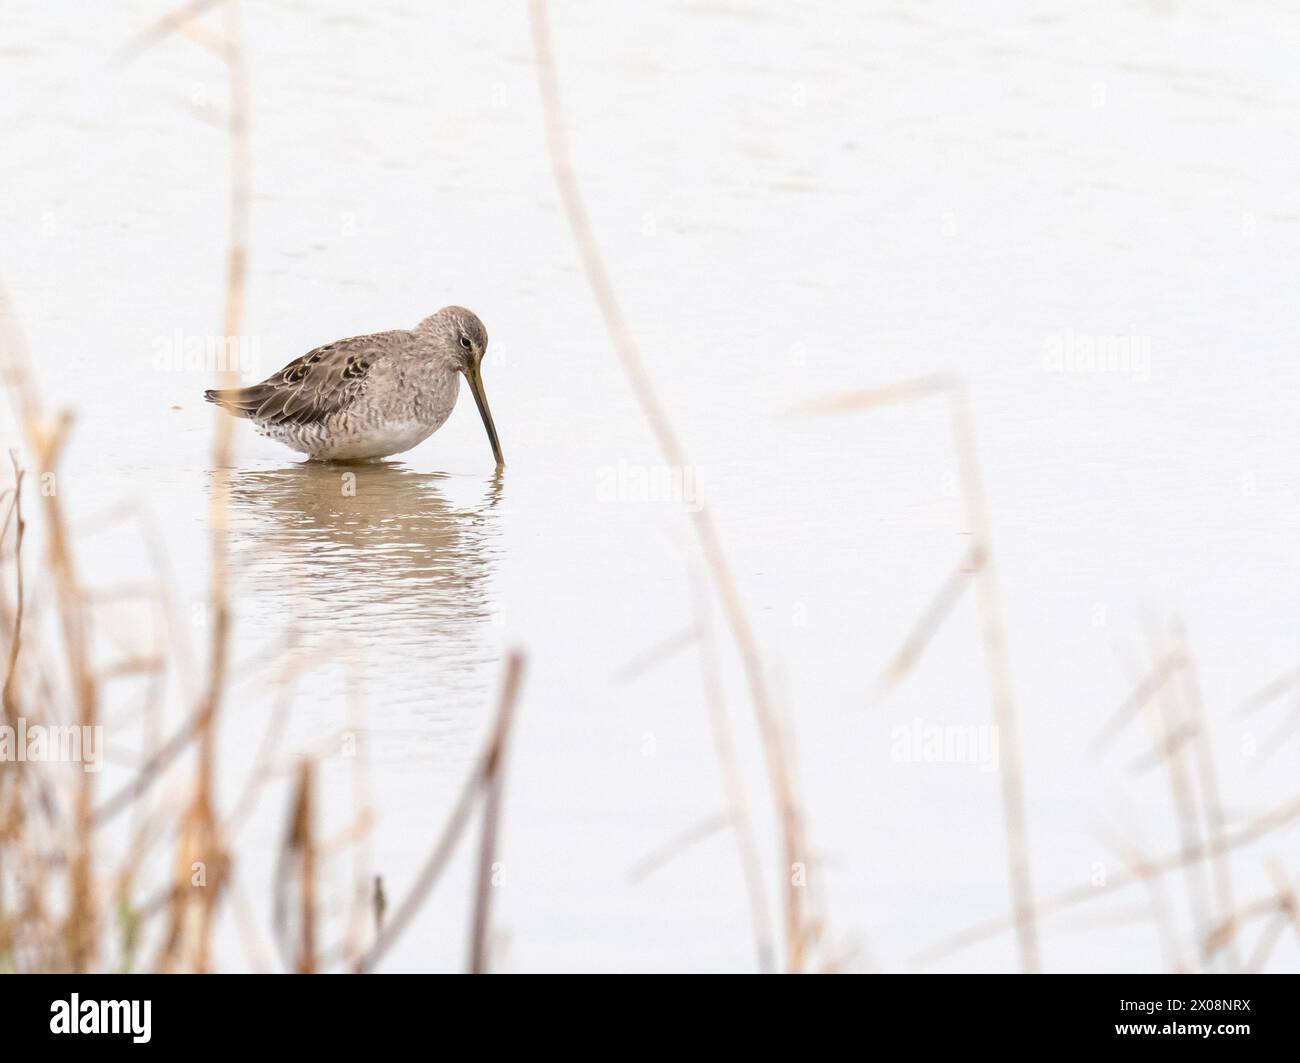 A long Billed Dowitcher, Limnodromus scolopaceus at Cley Next the Sea, Norfolk, Royaume-Uni. Banque D'Images